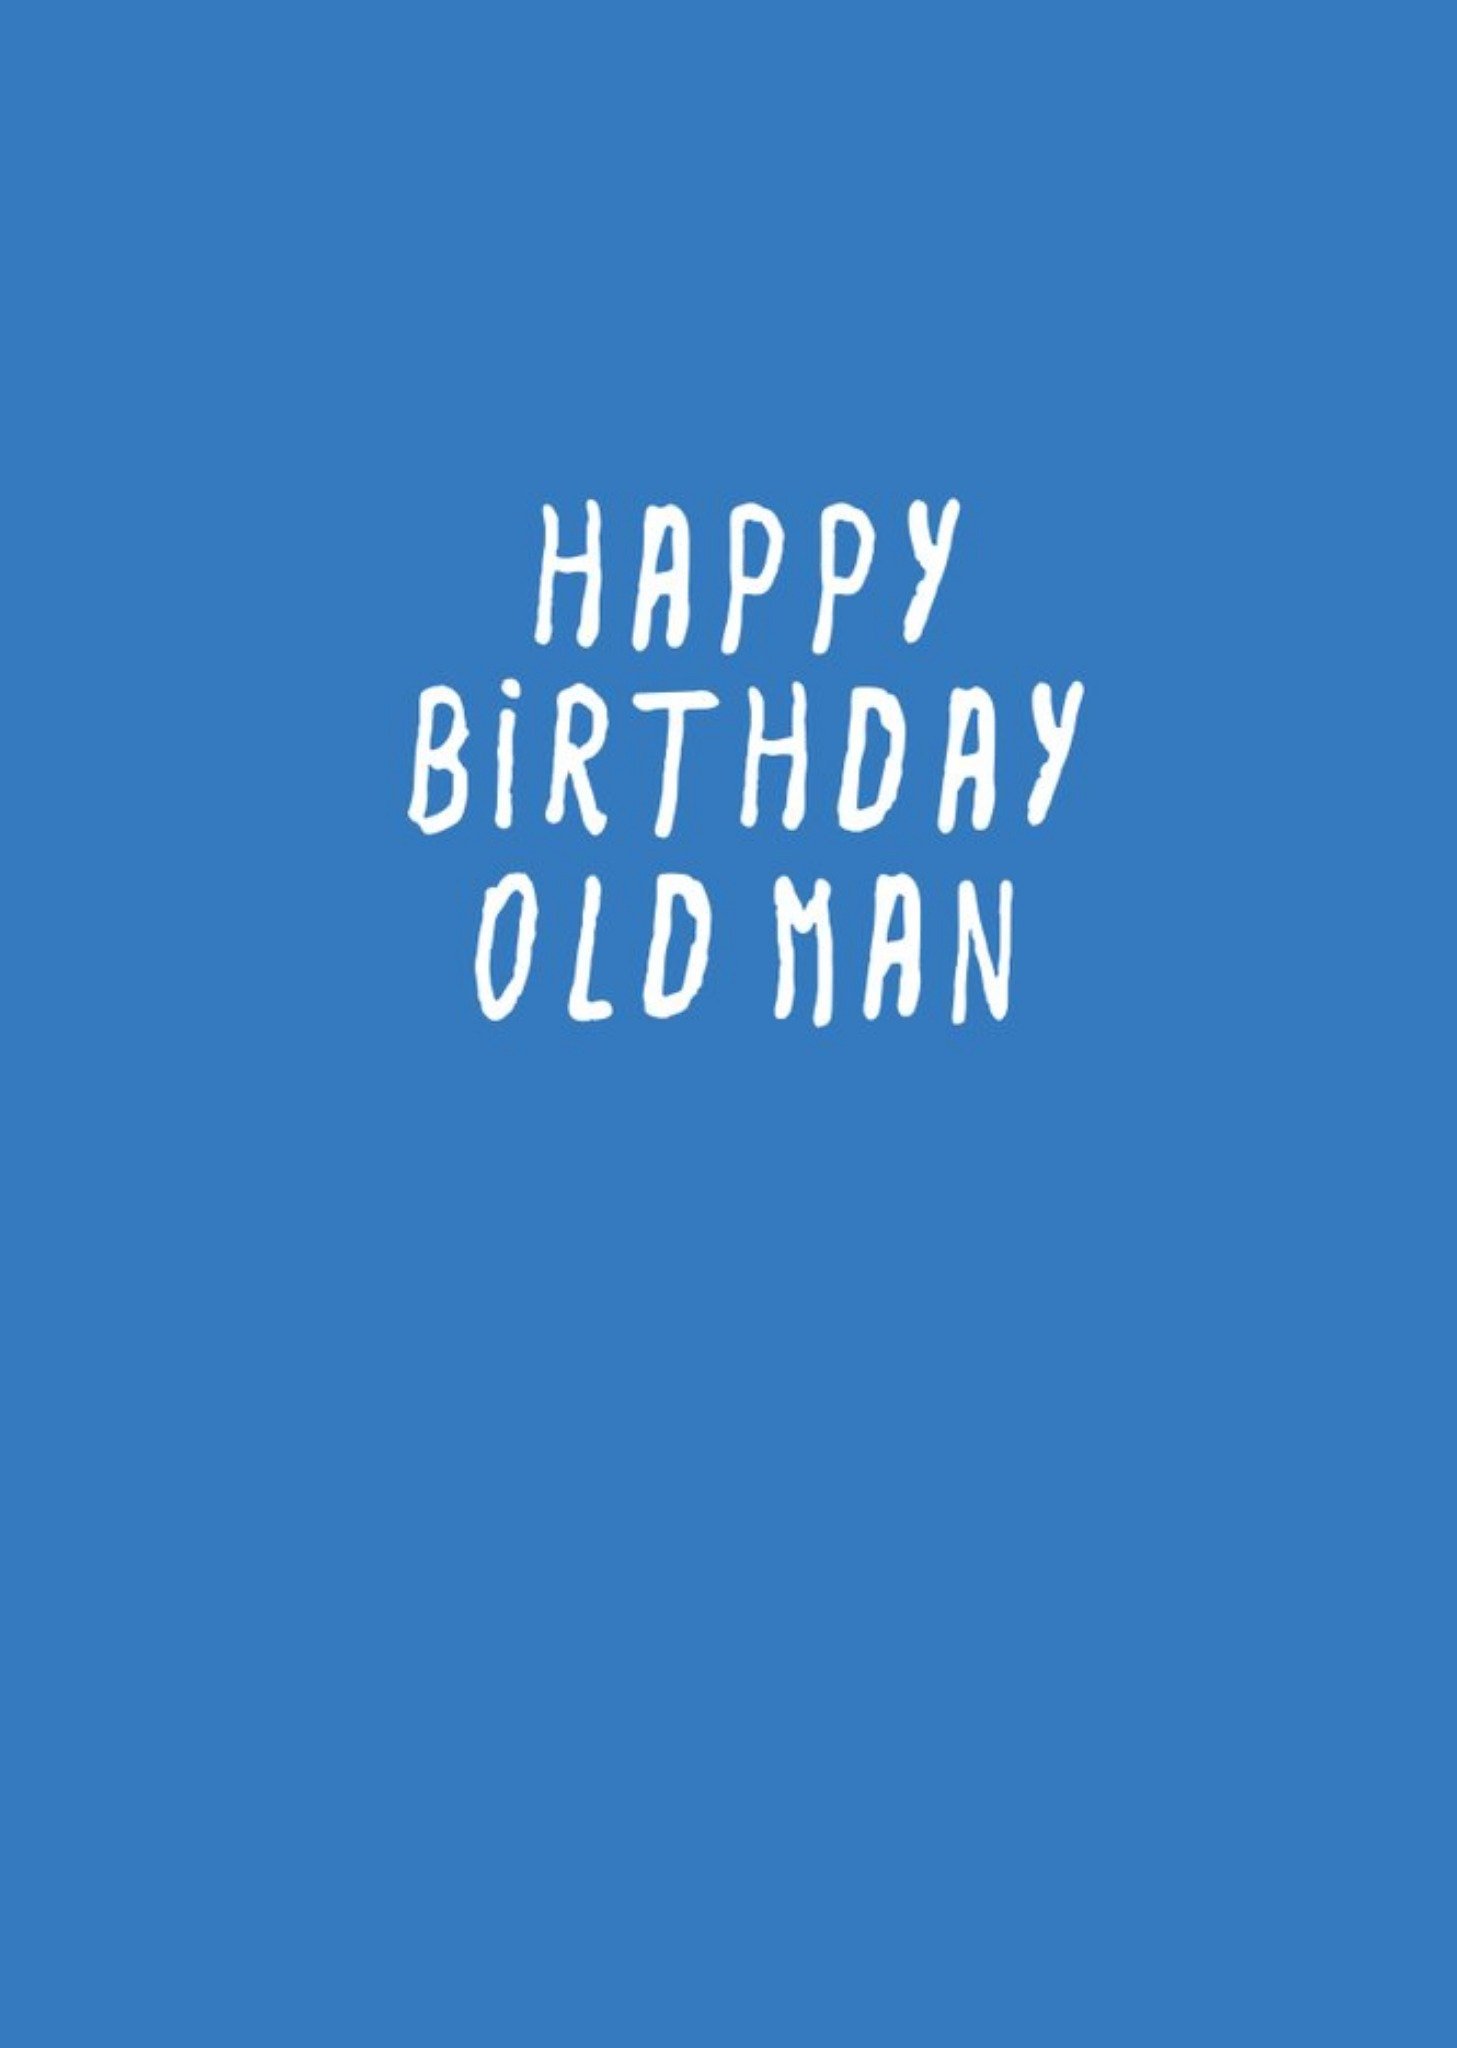 Moonpig Funny Typographical Old Man Birthday Card Ecard